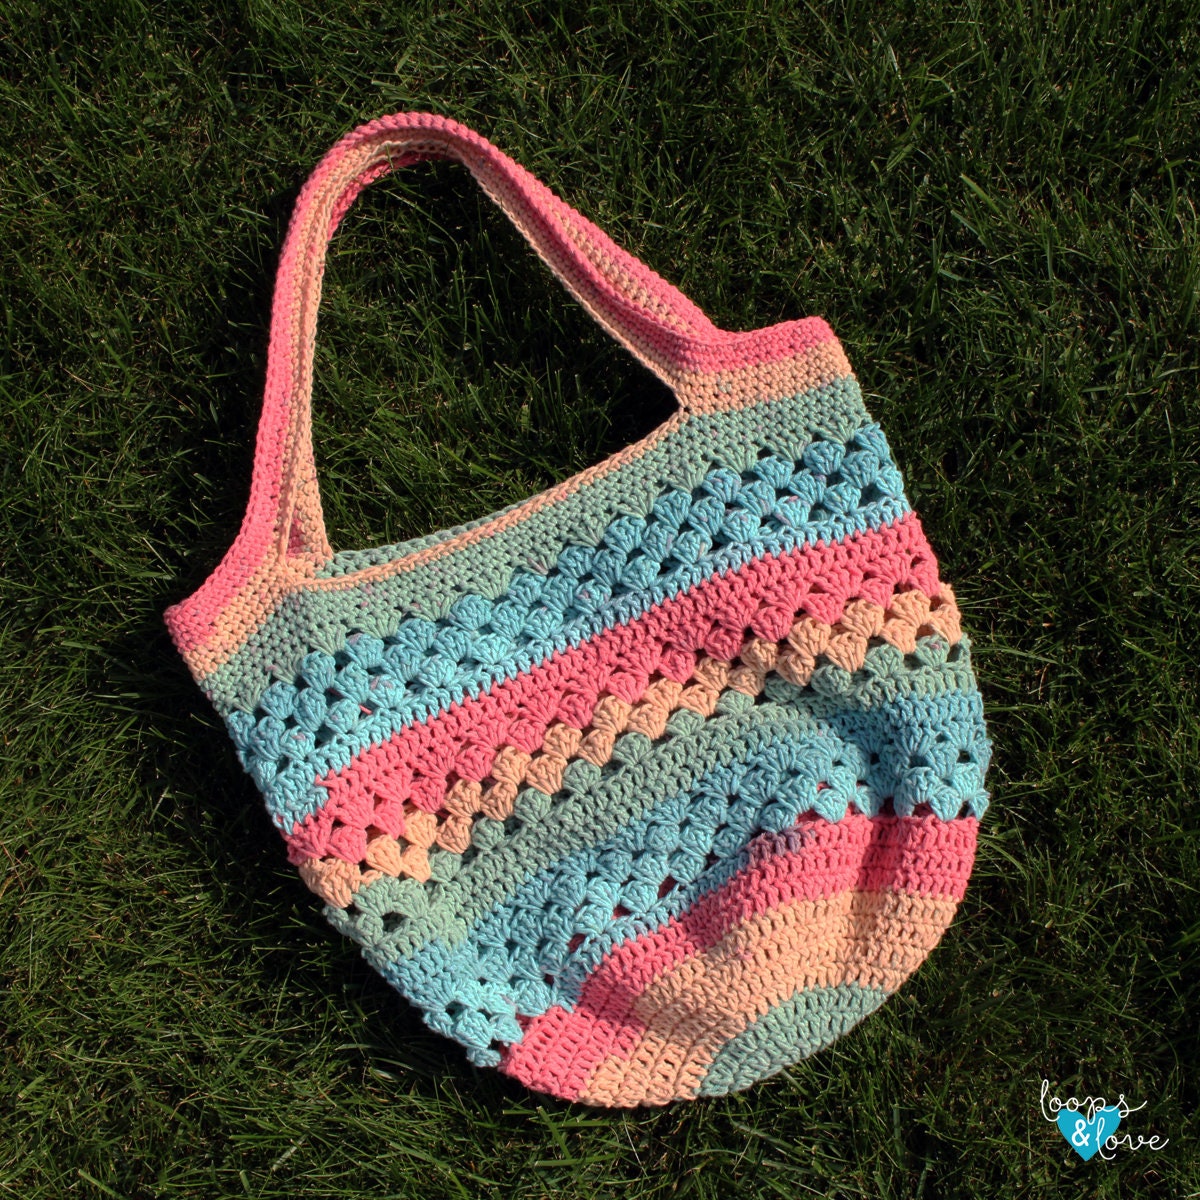 Crochet Heart Tote Bag for Sale by LexCrochet